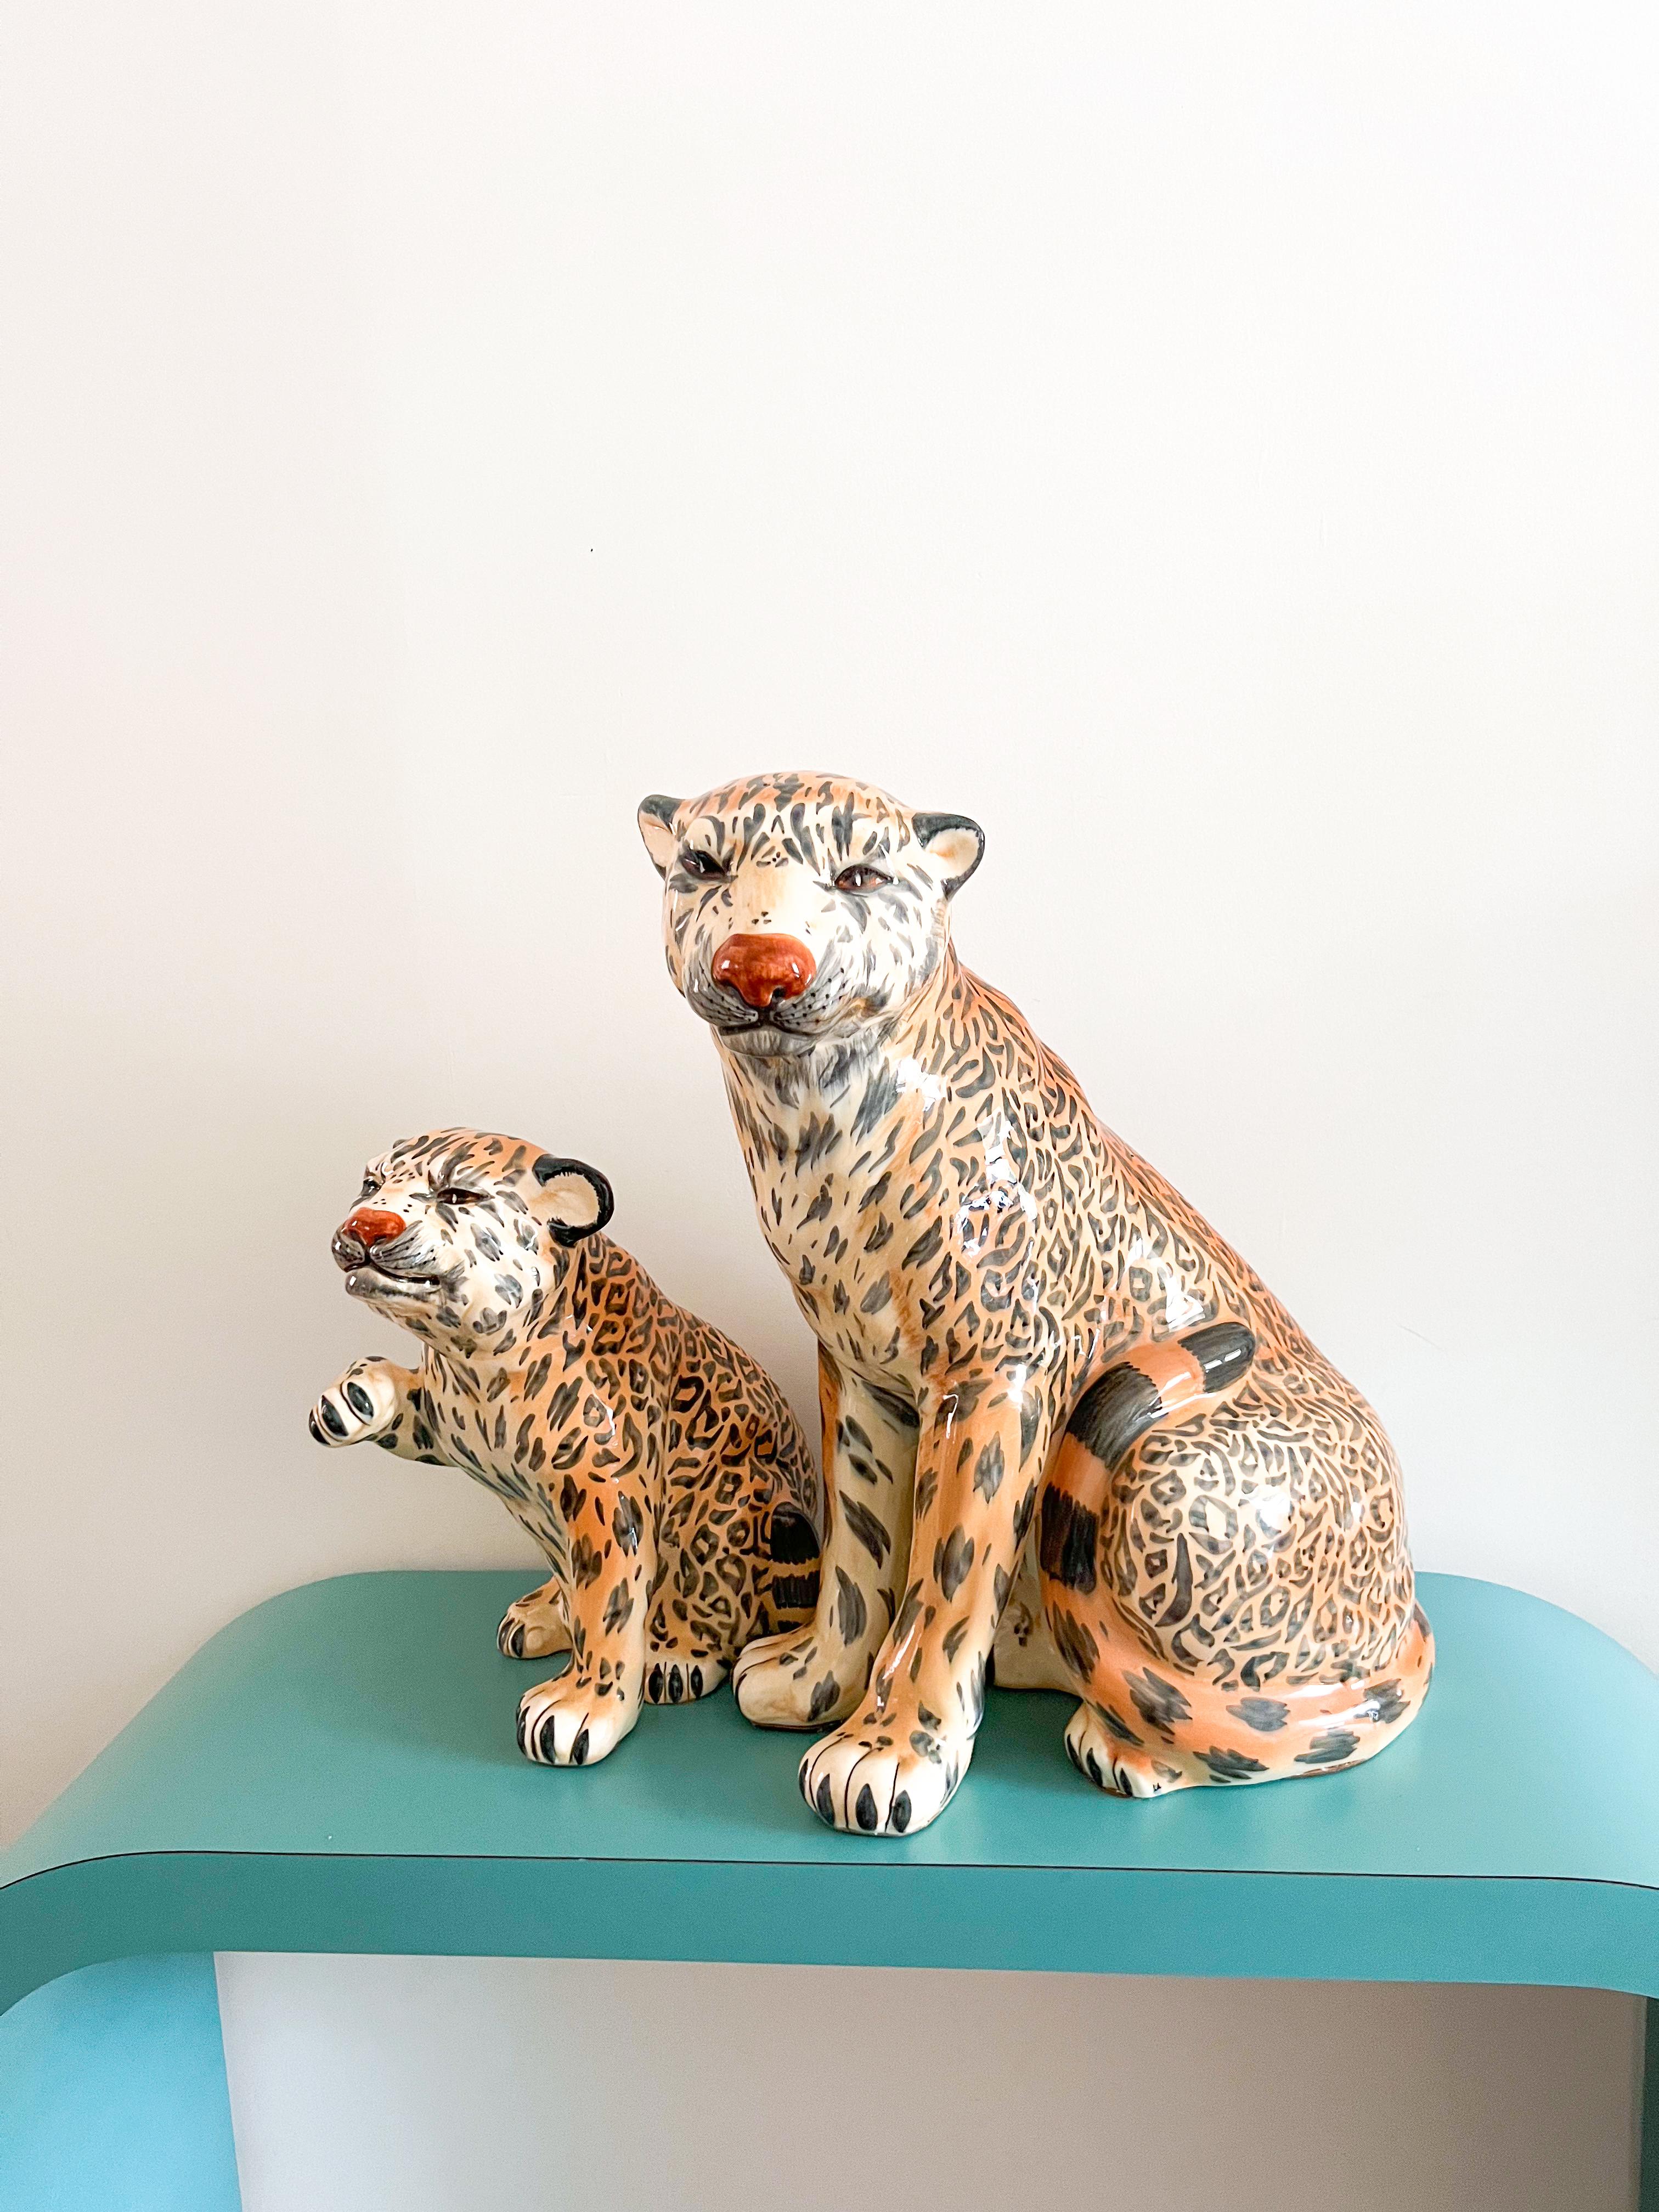 Pair of vintage ceramic leopards, portraying a mother and cub with striking realism. These sculptures showcase meticulous craftsmanship, featuring glazed ceramic finishes that capture the essence of fur and intricate facial expressions. Notably,